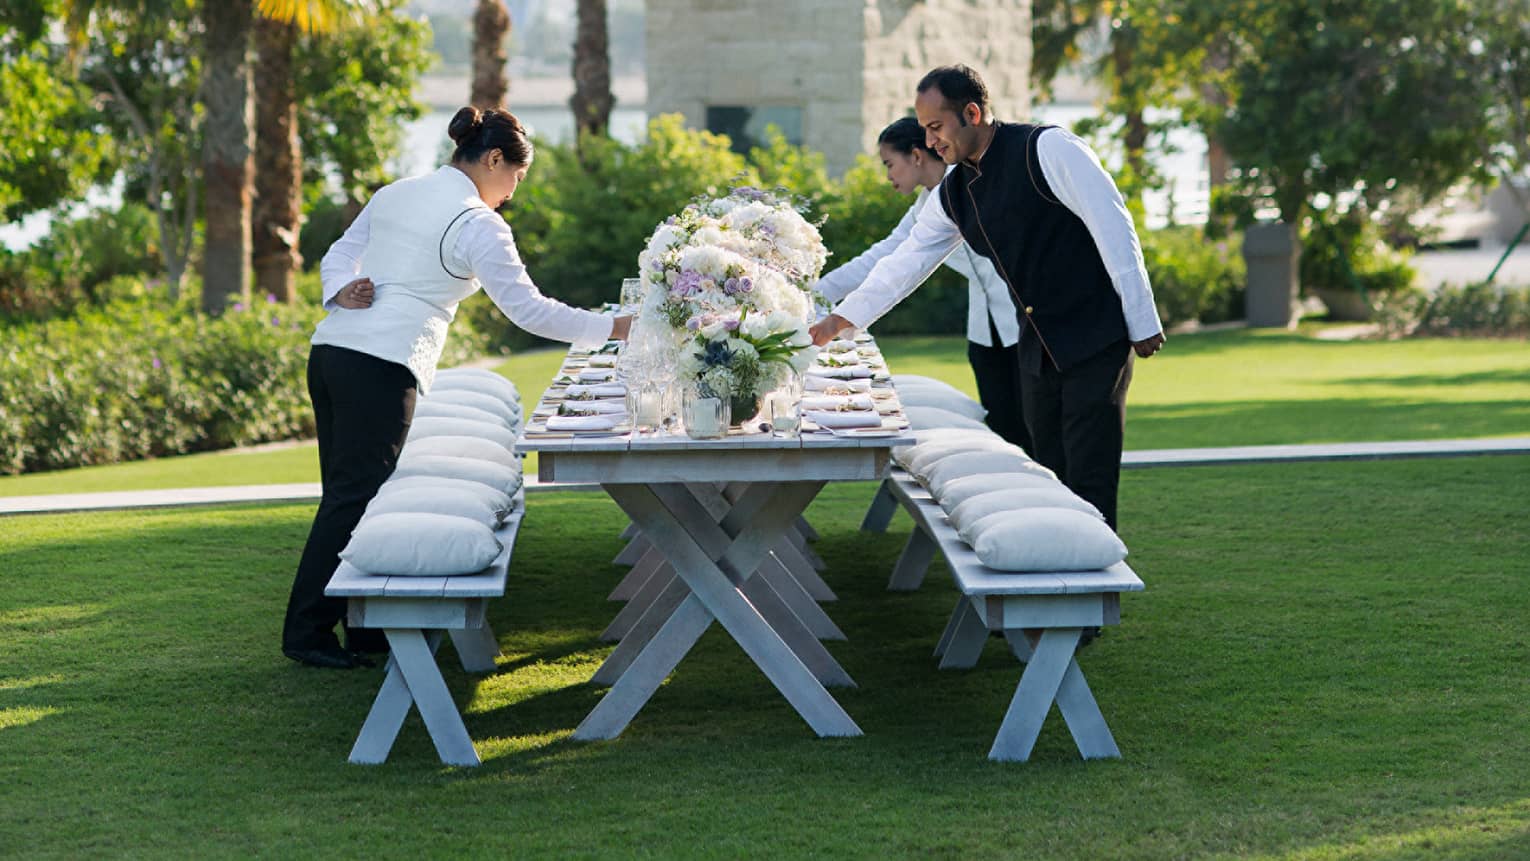 Hotel staff set outdoor wedding dining table on event lawn